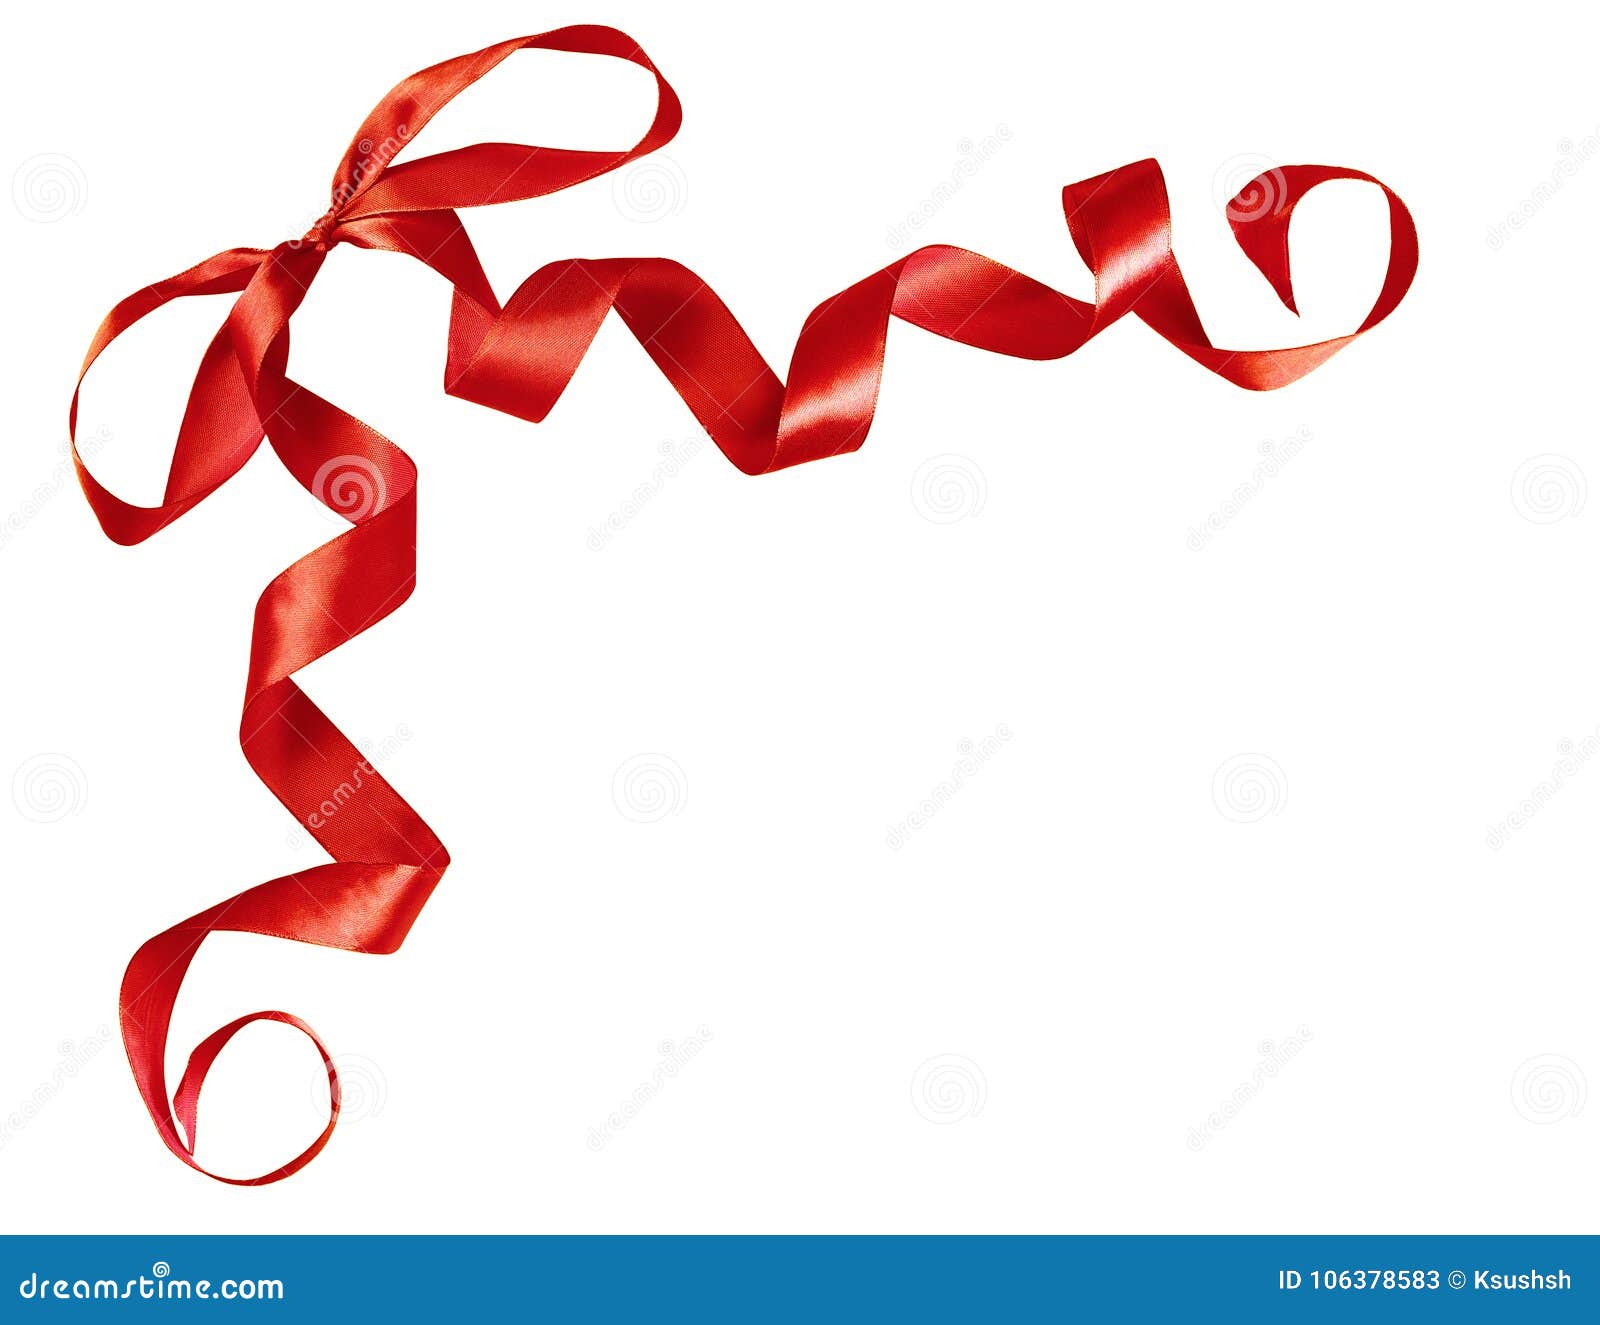 Thin Red Bow Crossed Ribbon Isolated Stock Photo 354212210